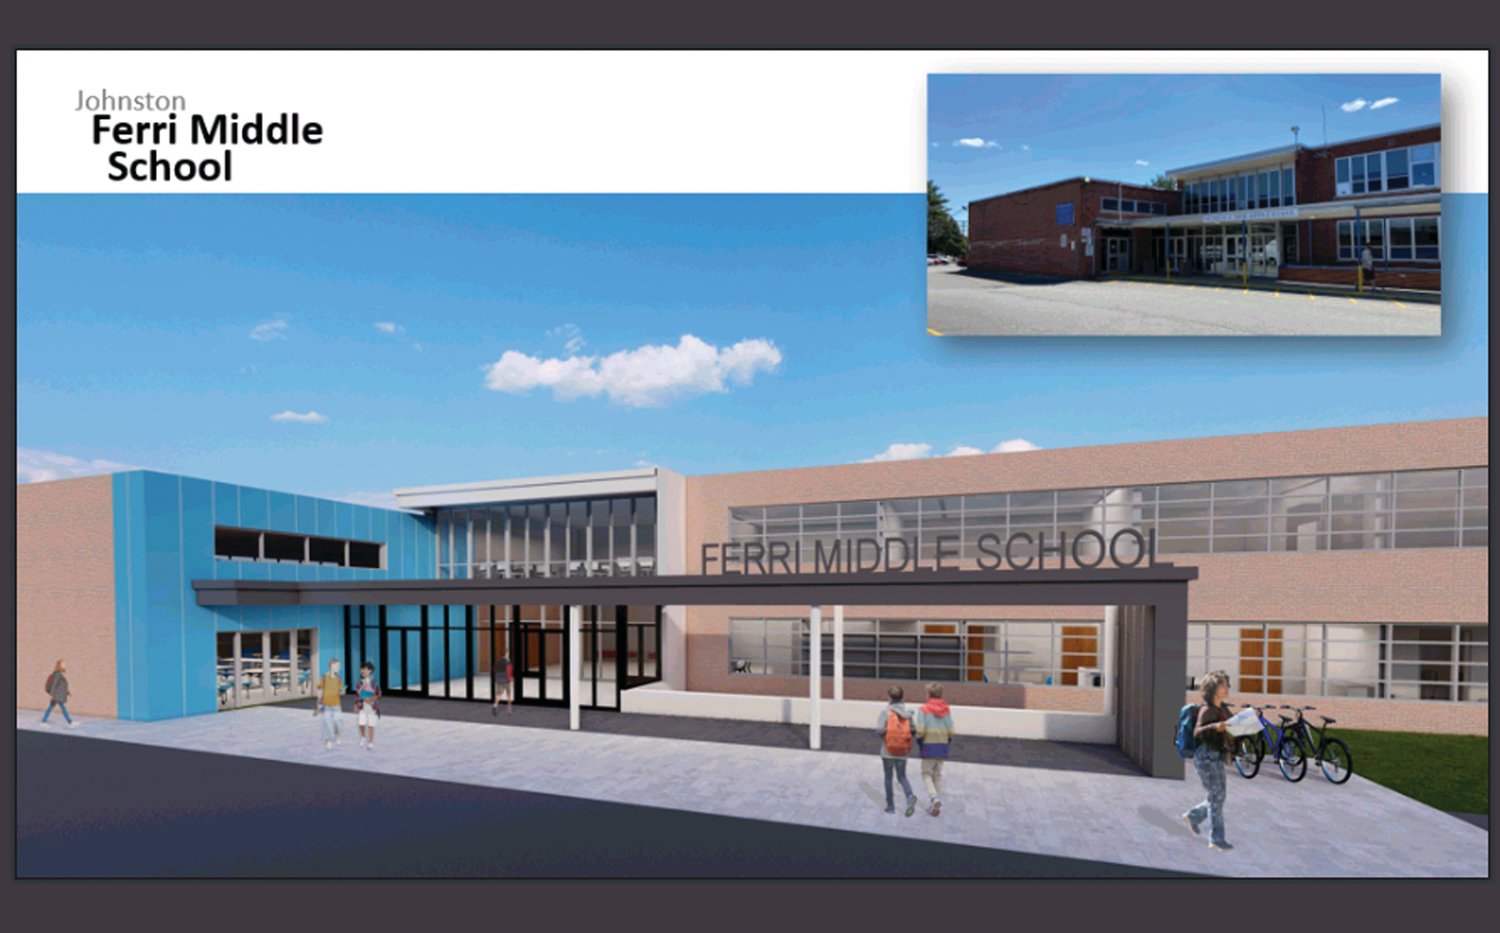 Nicholas A. Ferri Middle School
STATUS: Renovations
LOCATION: Expansion of the current Middle School at 10 Memorial Ave.
STUDENT BODY: 1,066 students in grades 5-8
PRICE TAG: $39 million
OPENING DATE: Tentatively scheduled to open in late summer of 2025